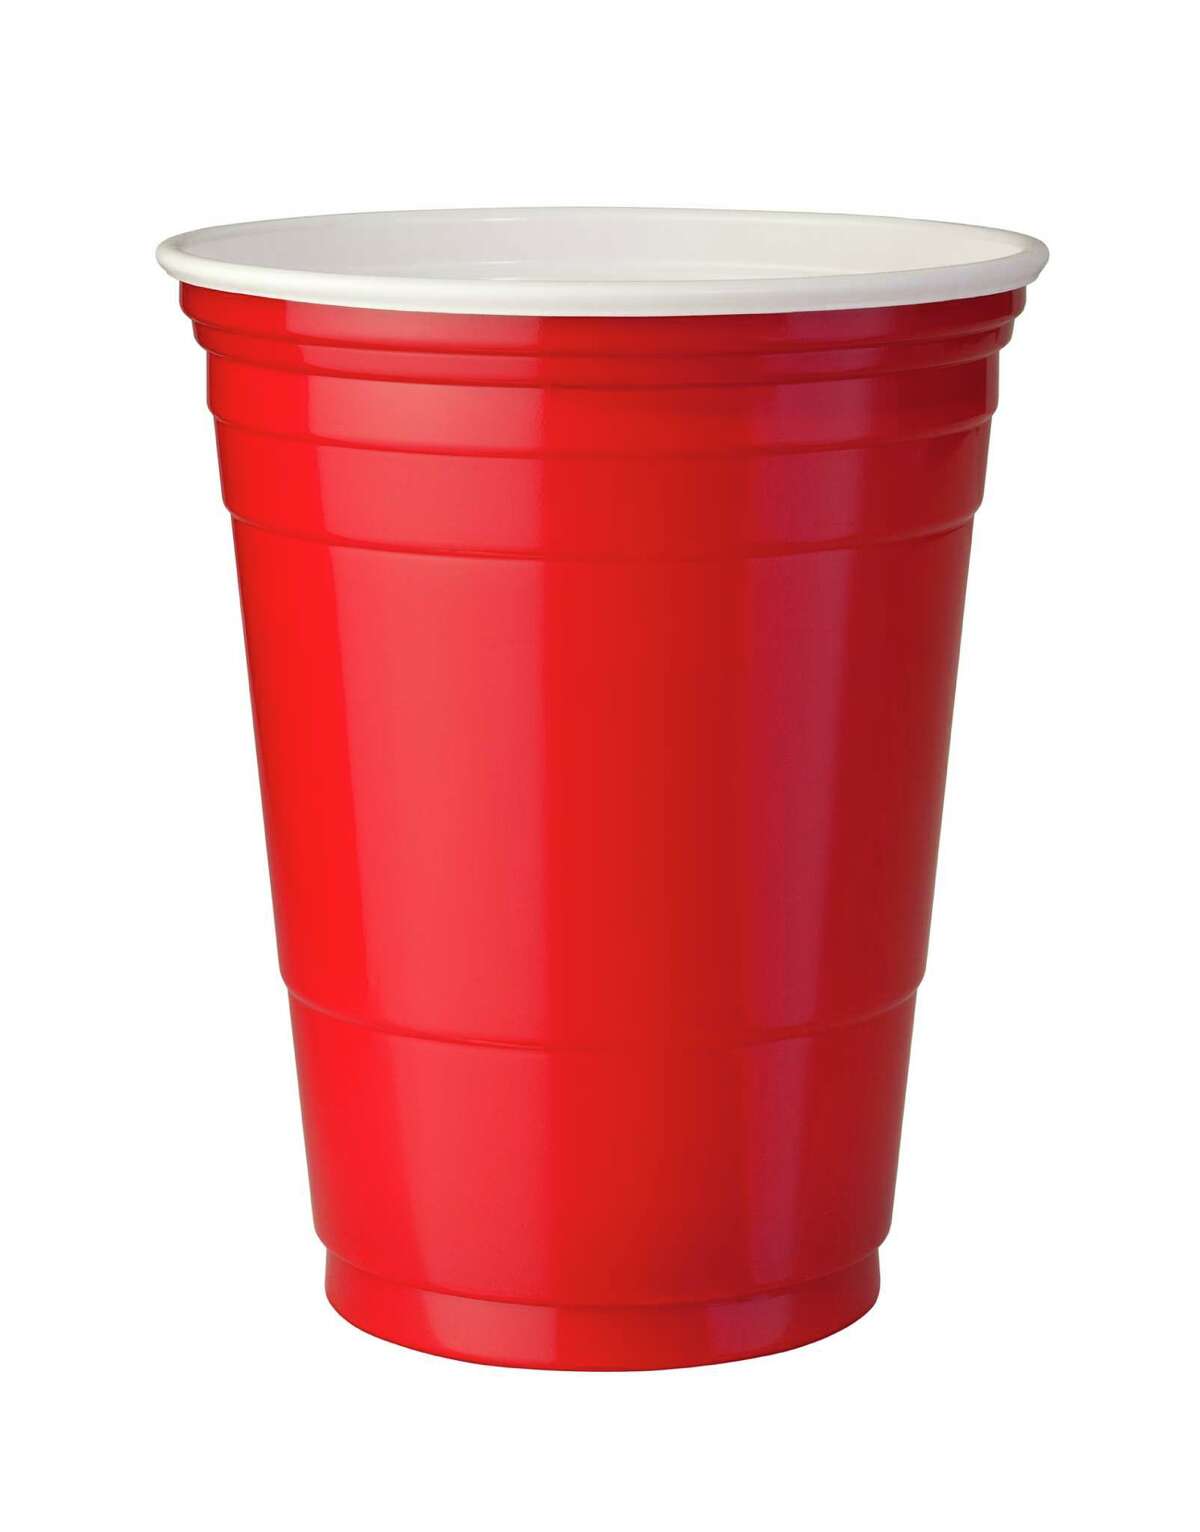 plastic cups with lids and straws